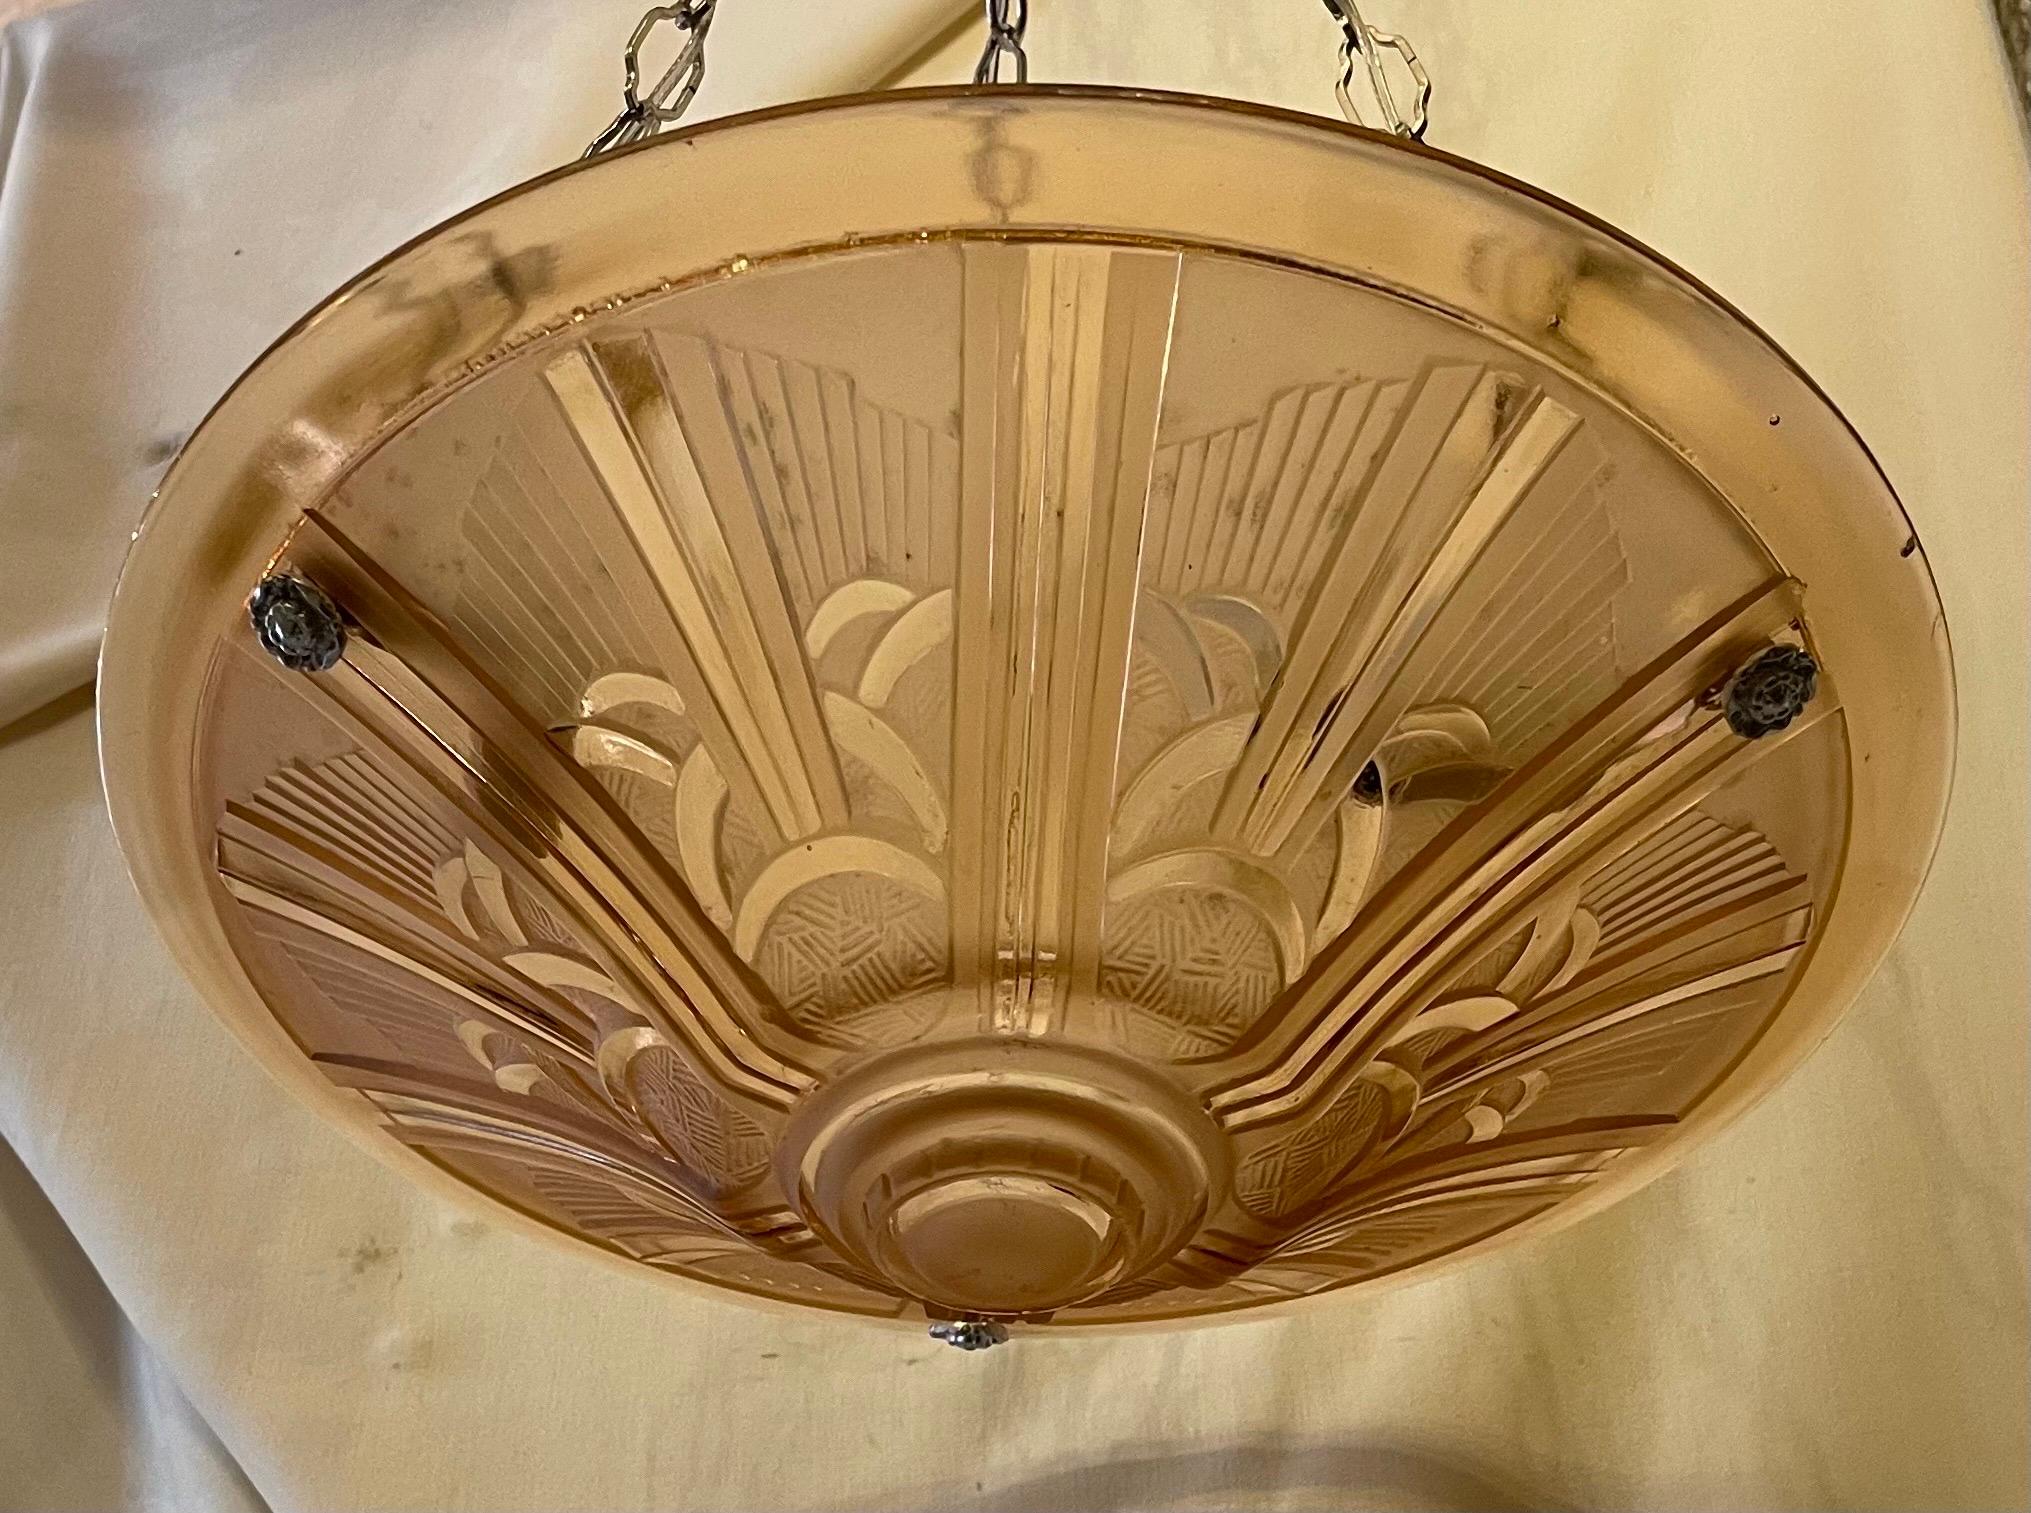 A Wonderful French Art Deco Chandelier In The Manner Of Dugué With A Pink / Peach Art Glass And Nickel Finishes This Semi Flush Fixtures Height Can Be Adjusted By Adding Or Removing Chain
Completely Rewired With 3 New Candelabra Sockets